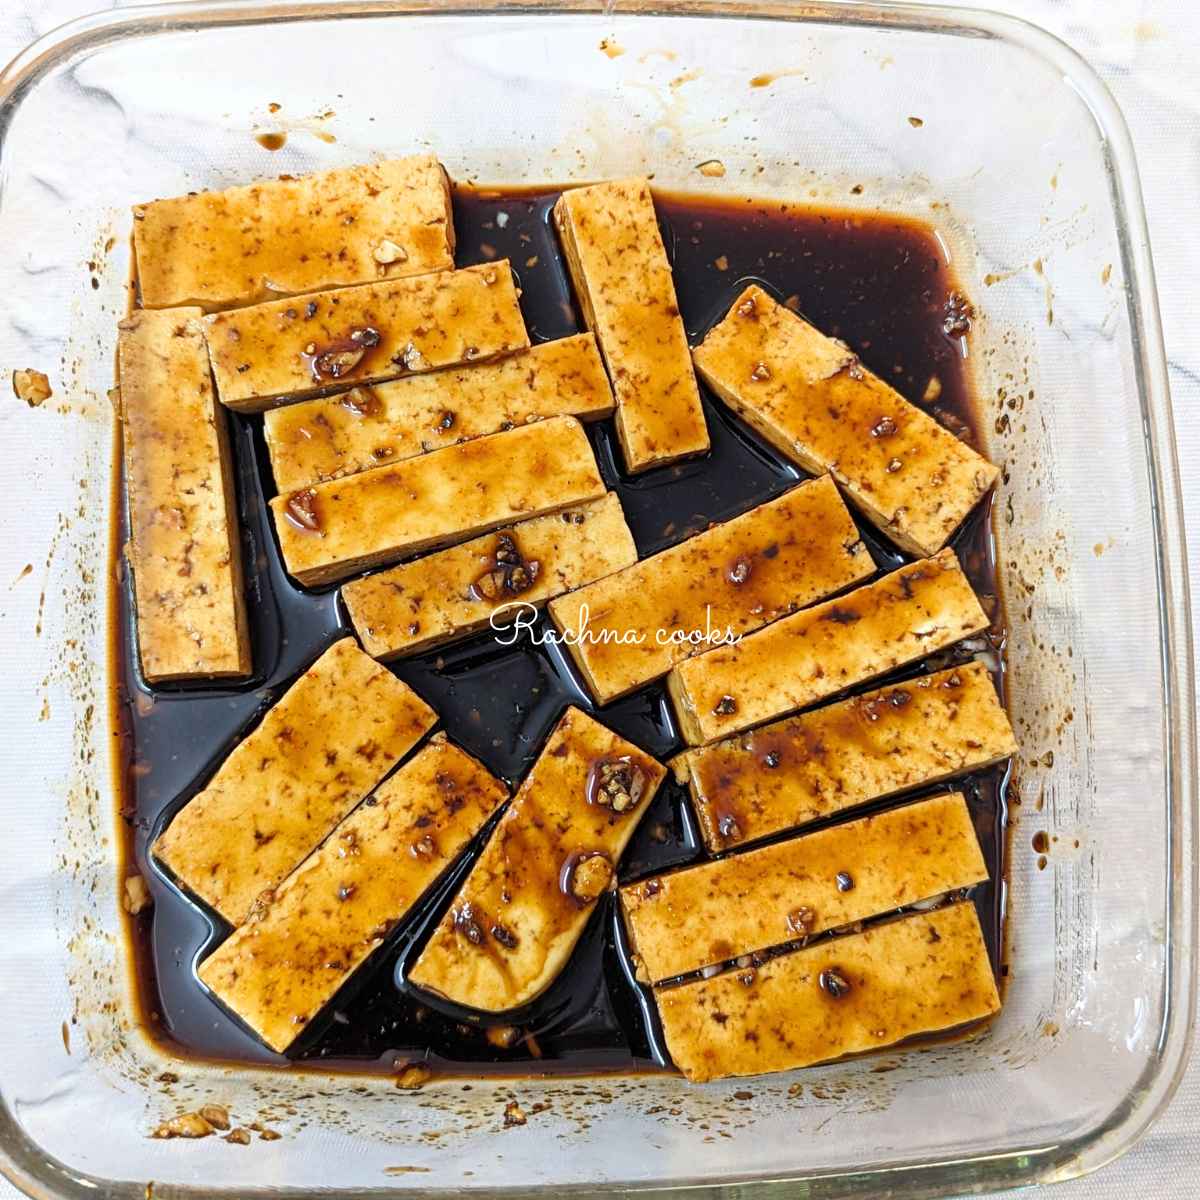 Tofu fries with marinade in a glass bowl